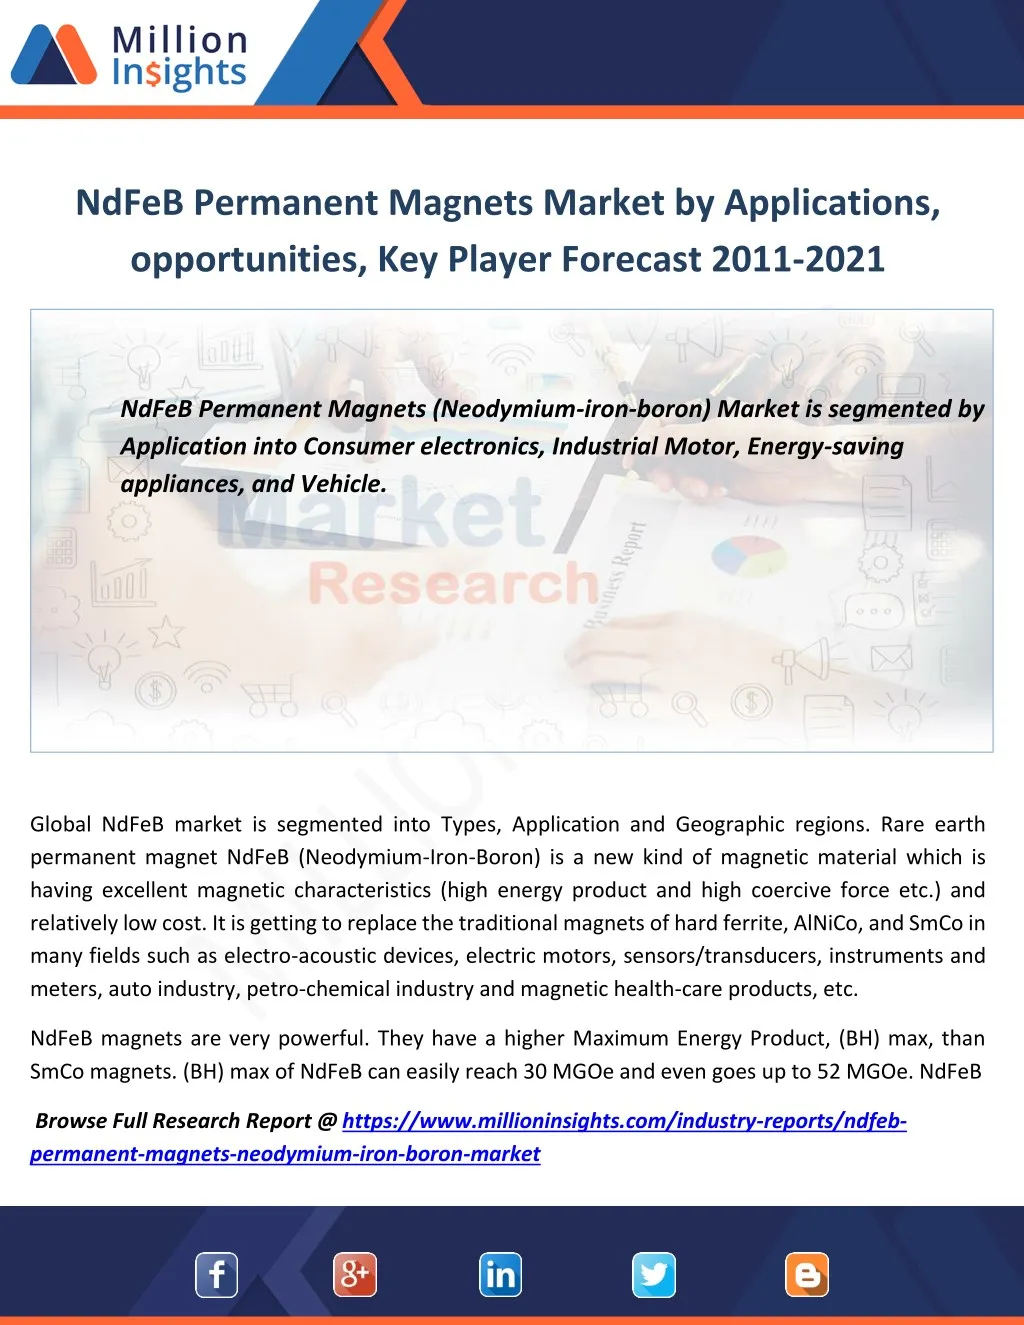 ndfeb permanent magnets market by applications